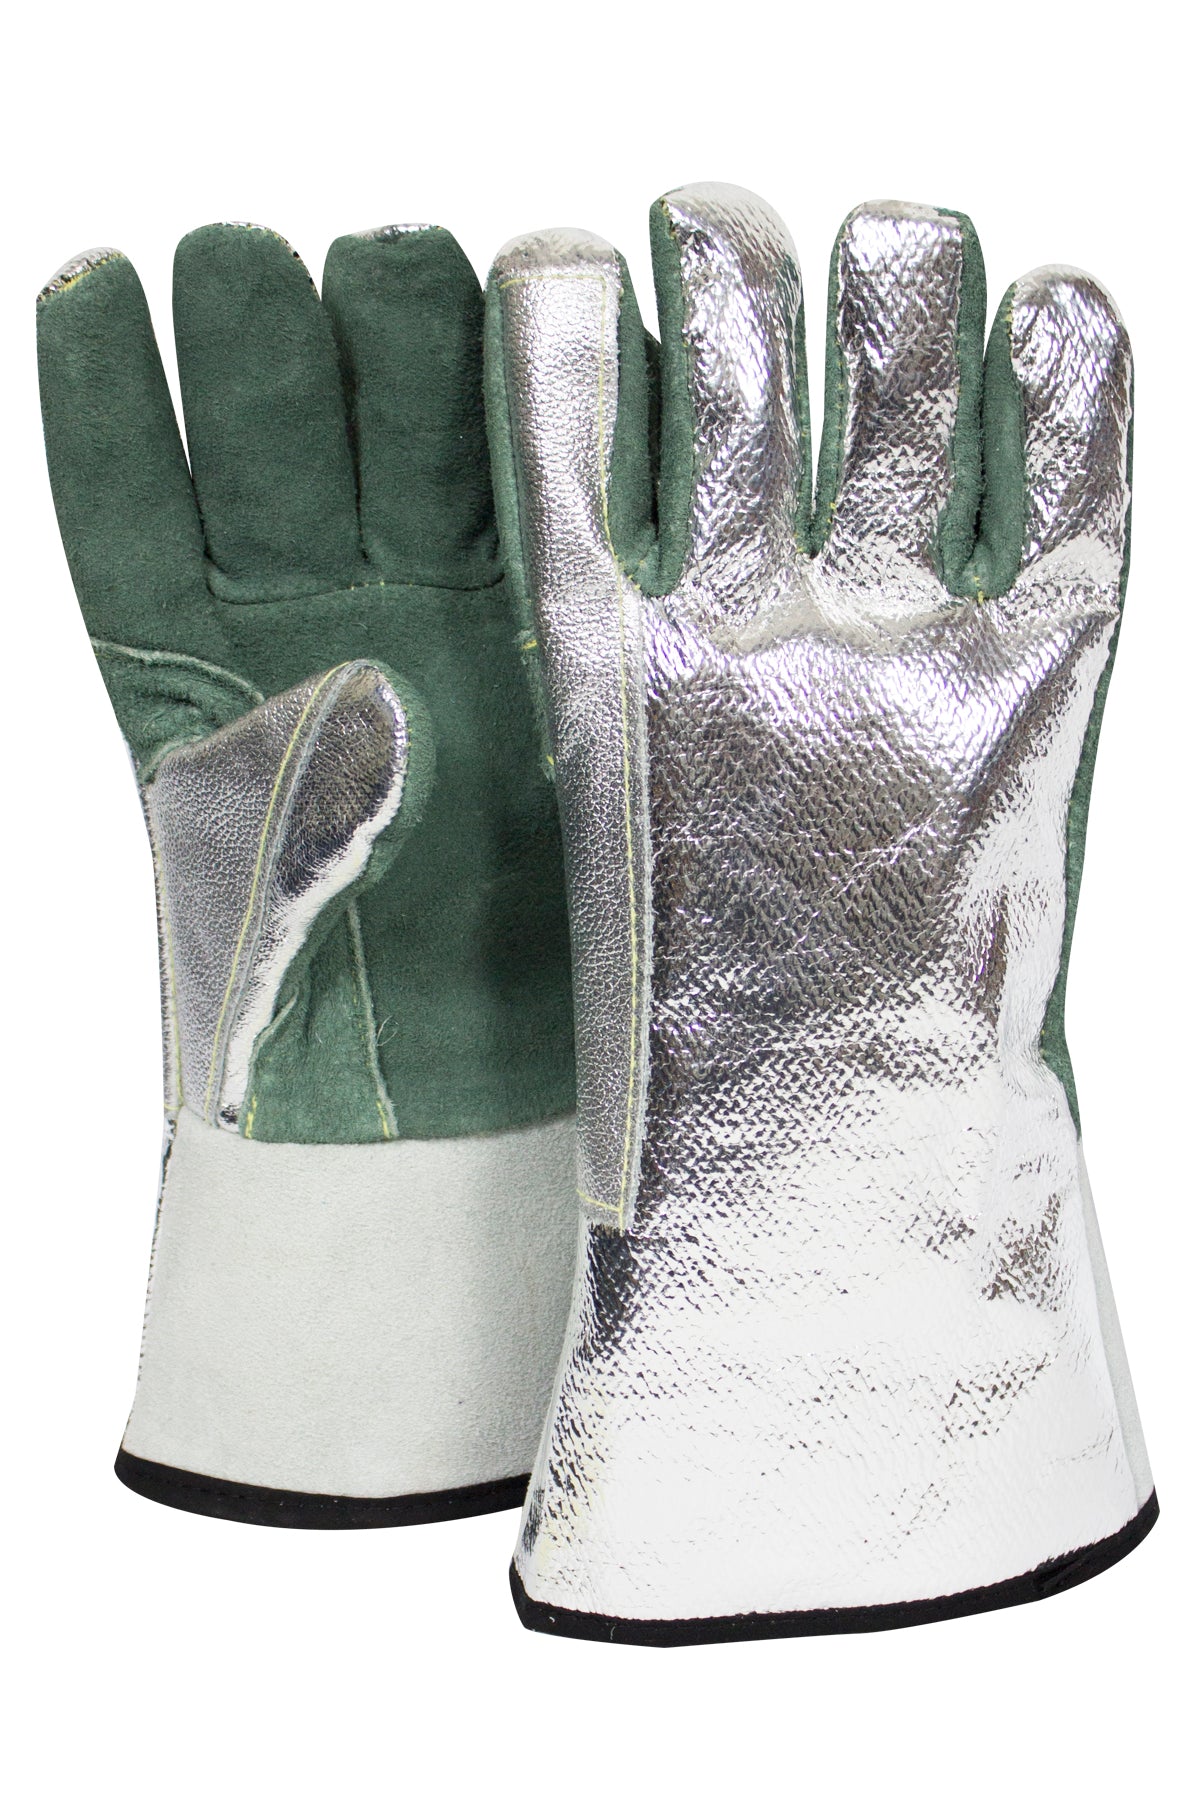 Aluminized High Heat Glove with Leather Palm